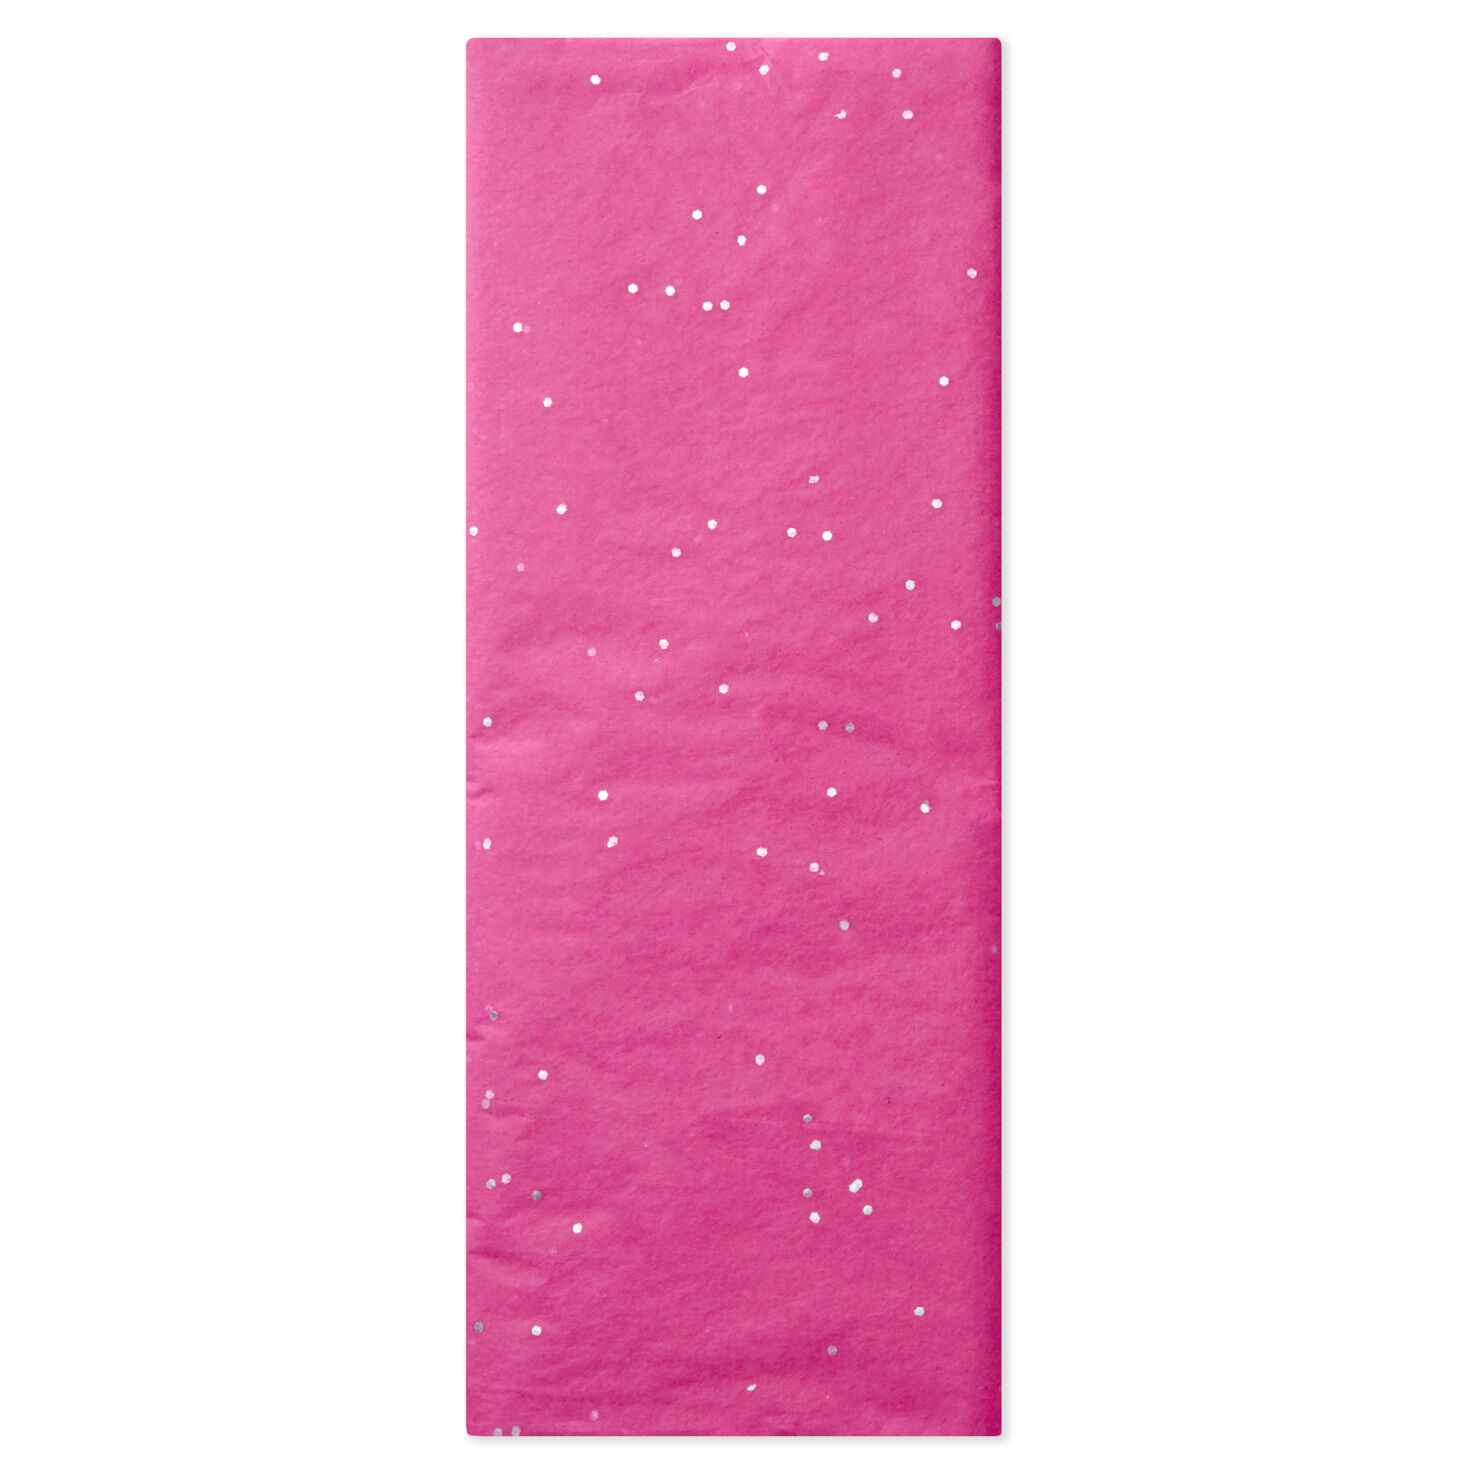 Hot Pink With Gems Tissue Paper, 6 sheets for only USD 2.49 | Hallmark